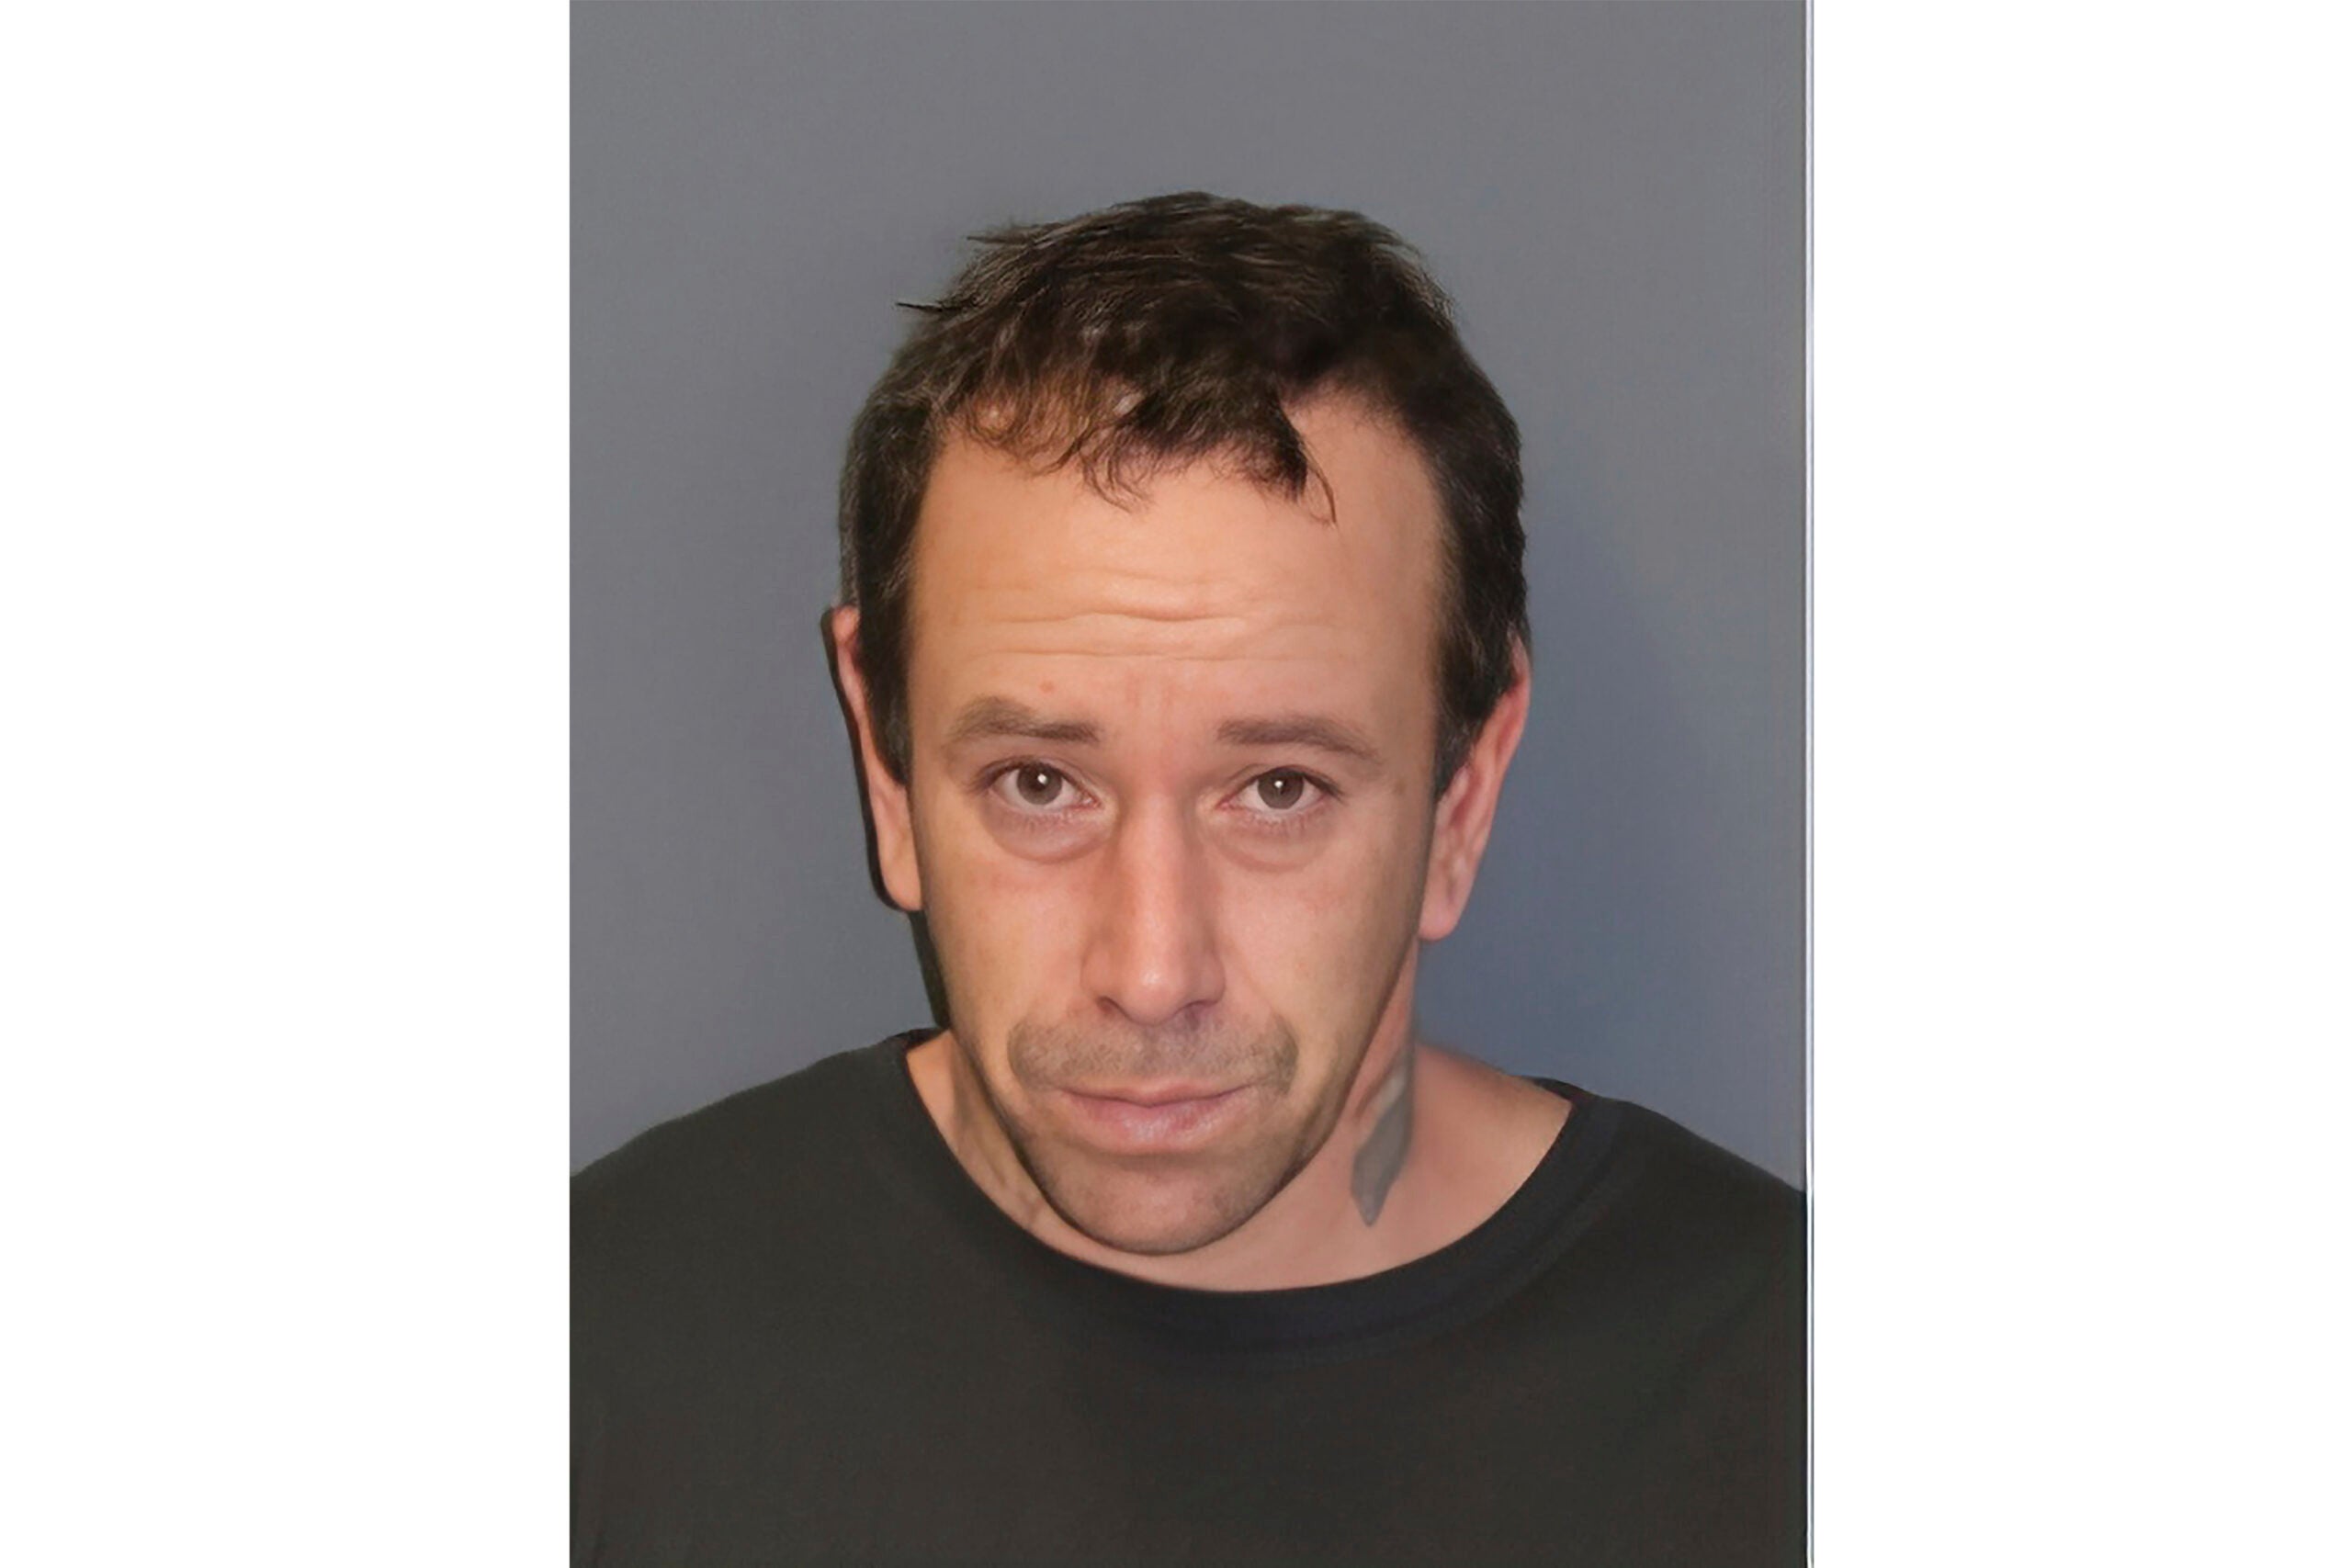 This photo provided by the Groton, Conn., Police Department, Wednesday, Dec. 20, 2023, shows Shawn Conlon. Conlon, 44, who was wanted in the killing of the mother of Heidi Voight, an NBC Connecticut news anchor and Miss Connecticut 2006, was captured at a Connecticut hotel Wednesday, the U.S. Marshals Service said. Vermont State Police, Groton police and the U.S. Marshals Violent Fugitive Task Force worked together to find Conlon, authorities said. (Groton Connecticut Police Department via AP)